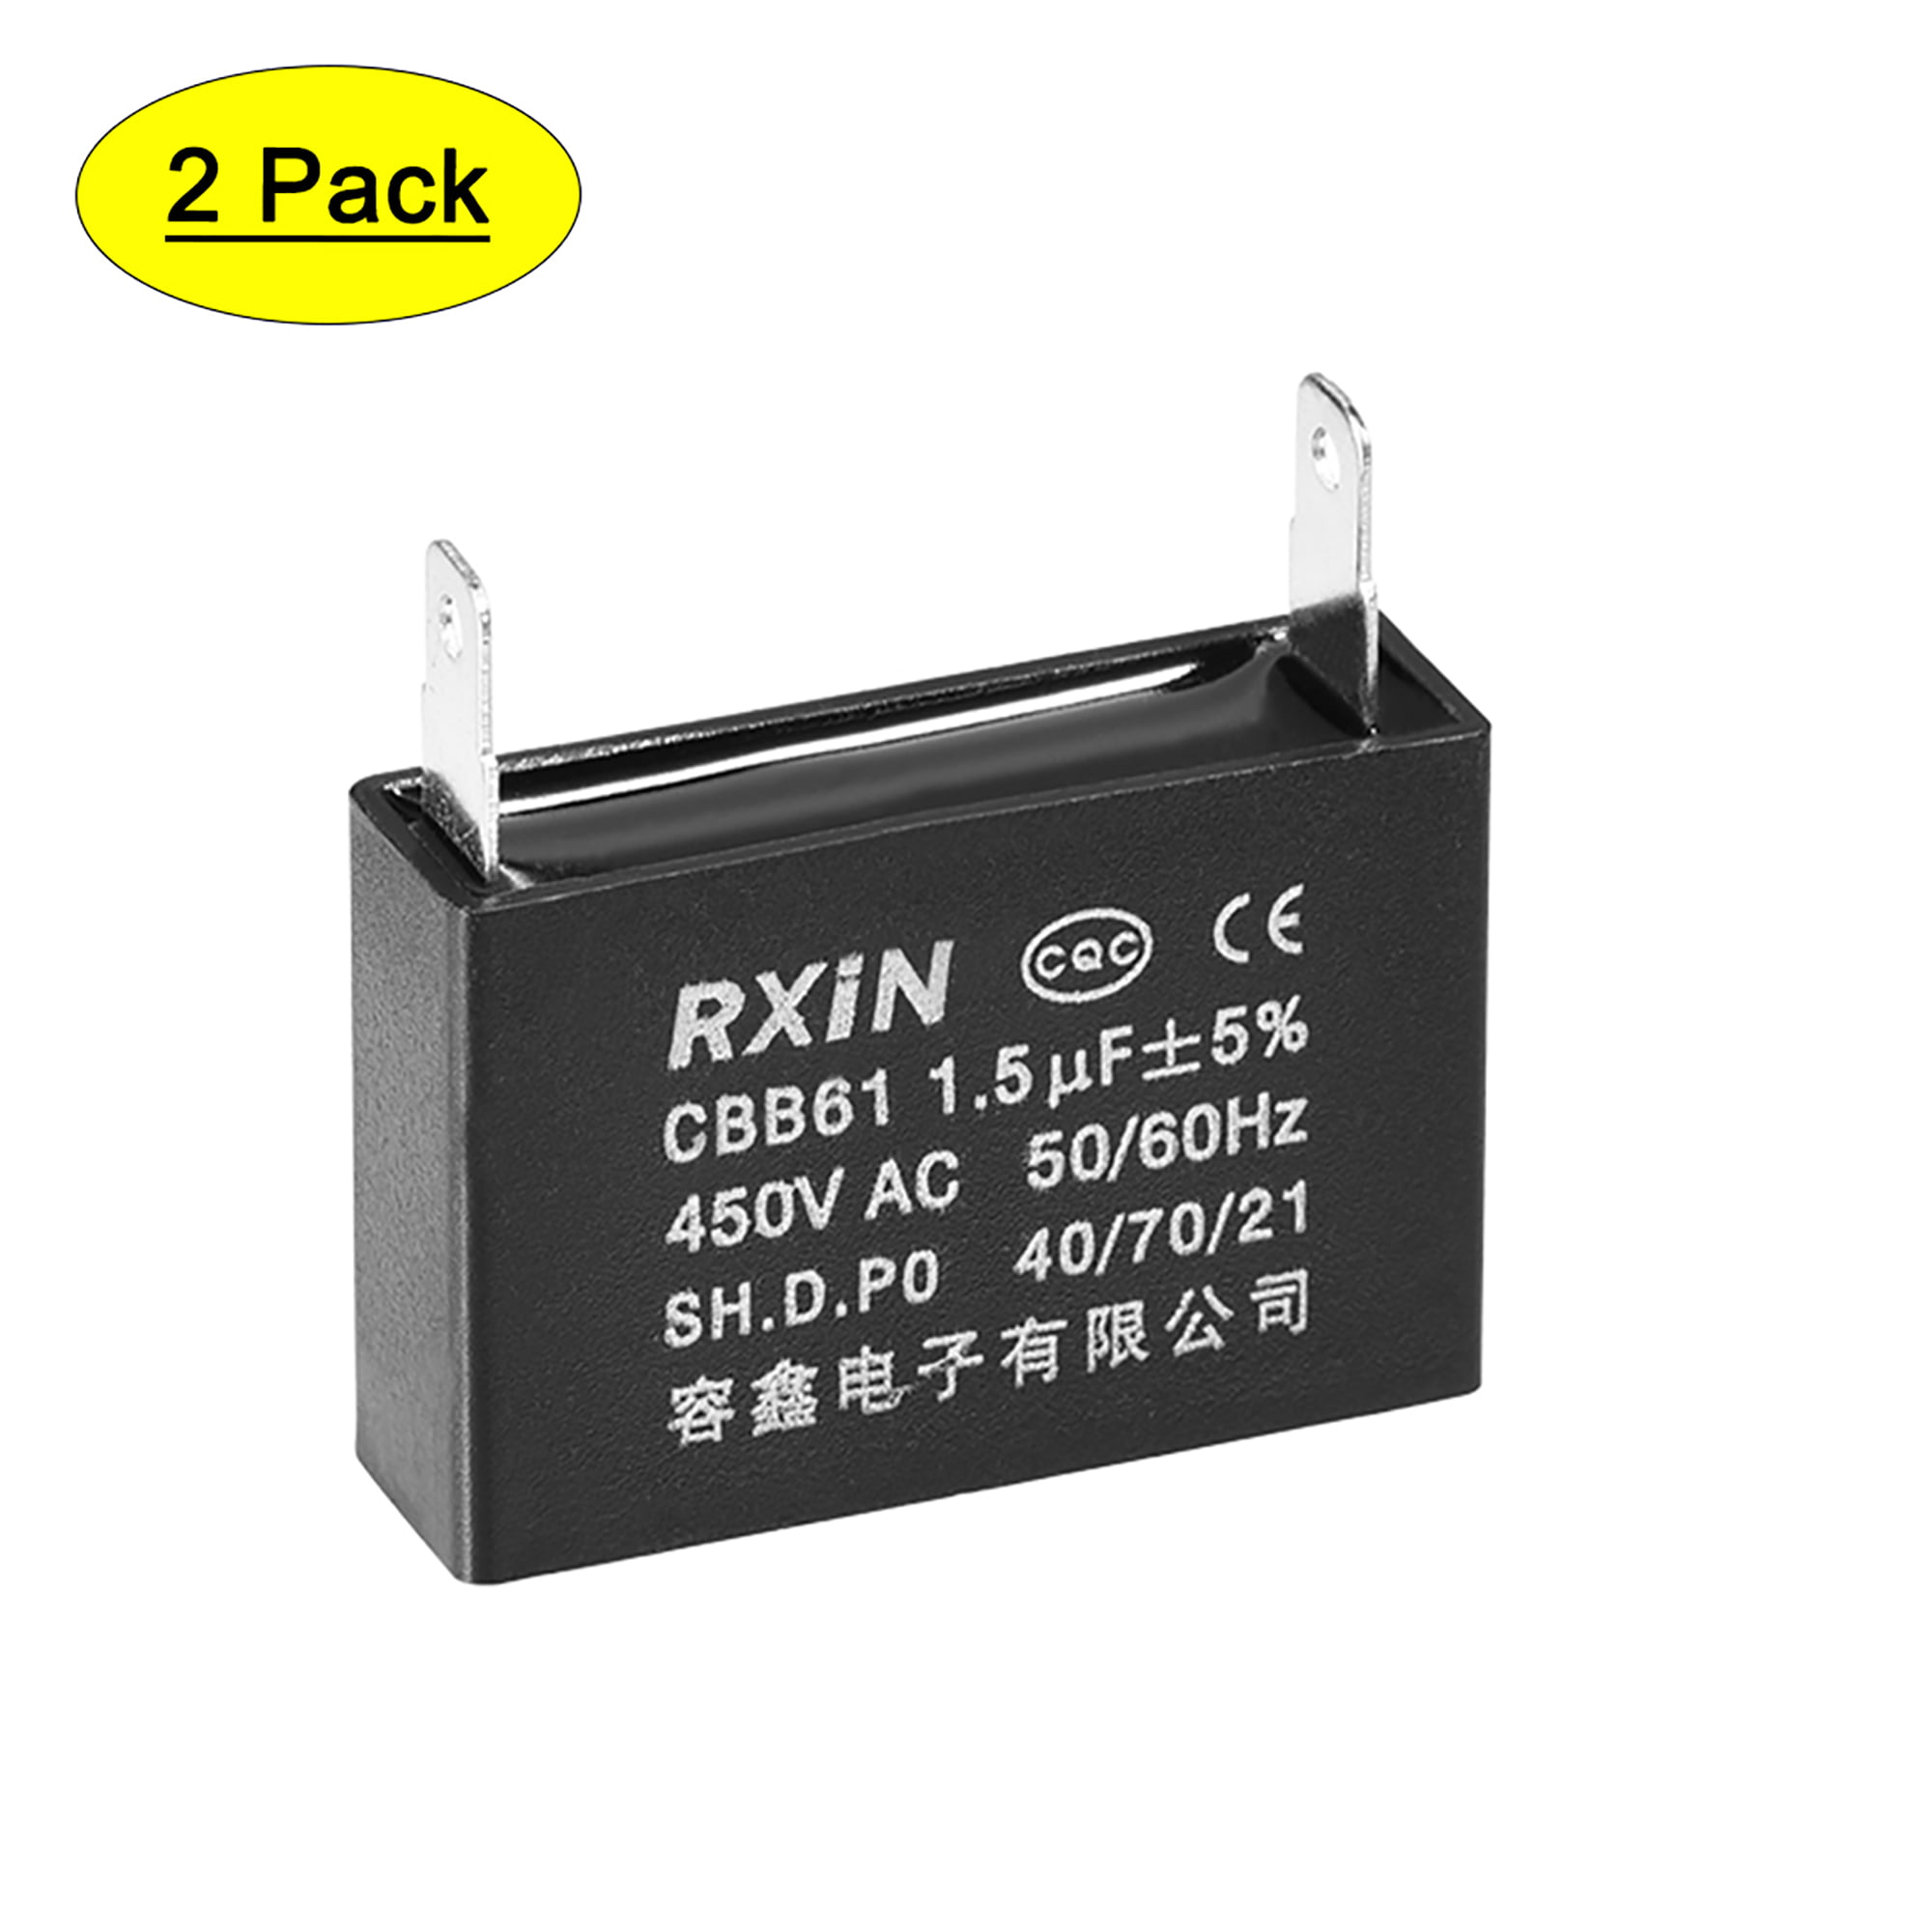 CBB61 Run Capacitor 450V AC 1.5uF run Capacitor for fan and other appliances 